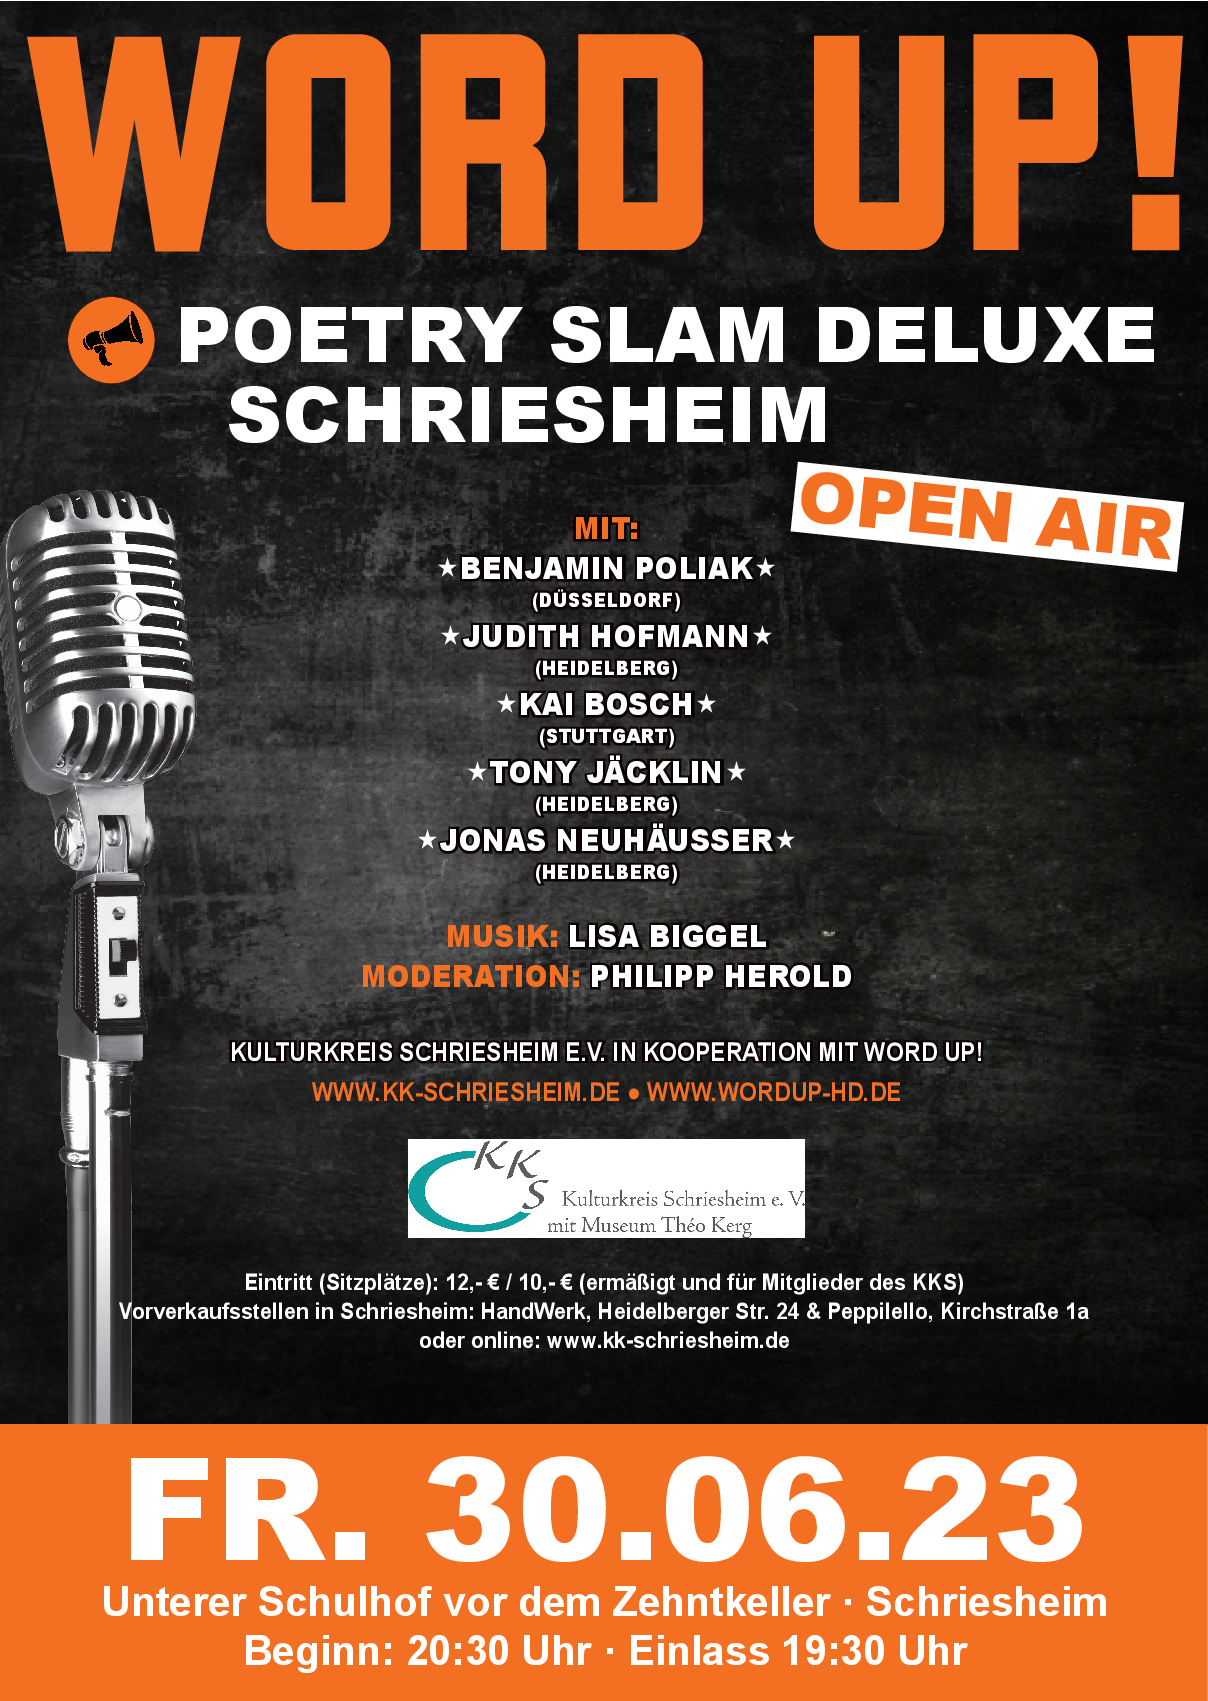 WORD UP! - Poster, Poetry Slam DELUXE